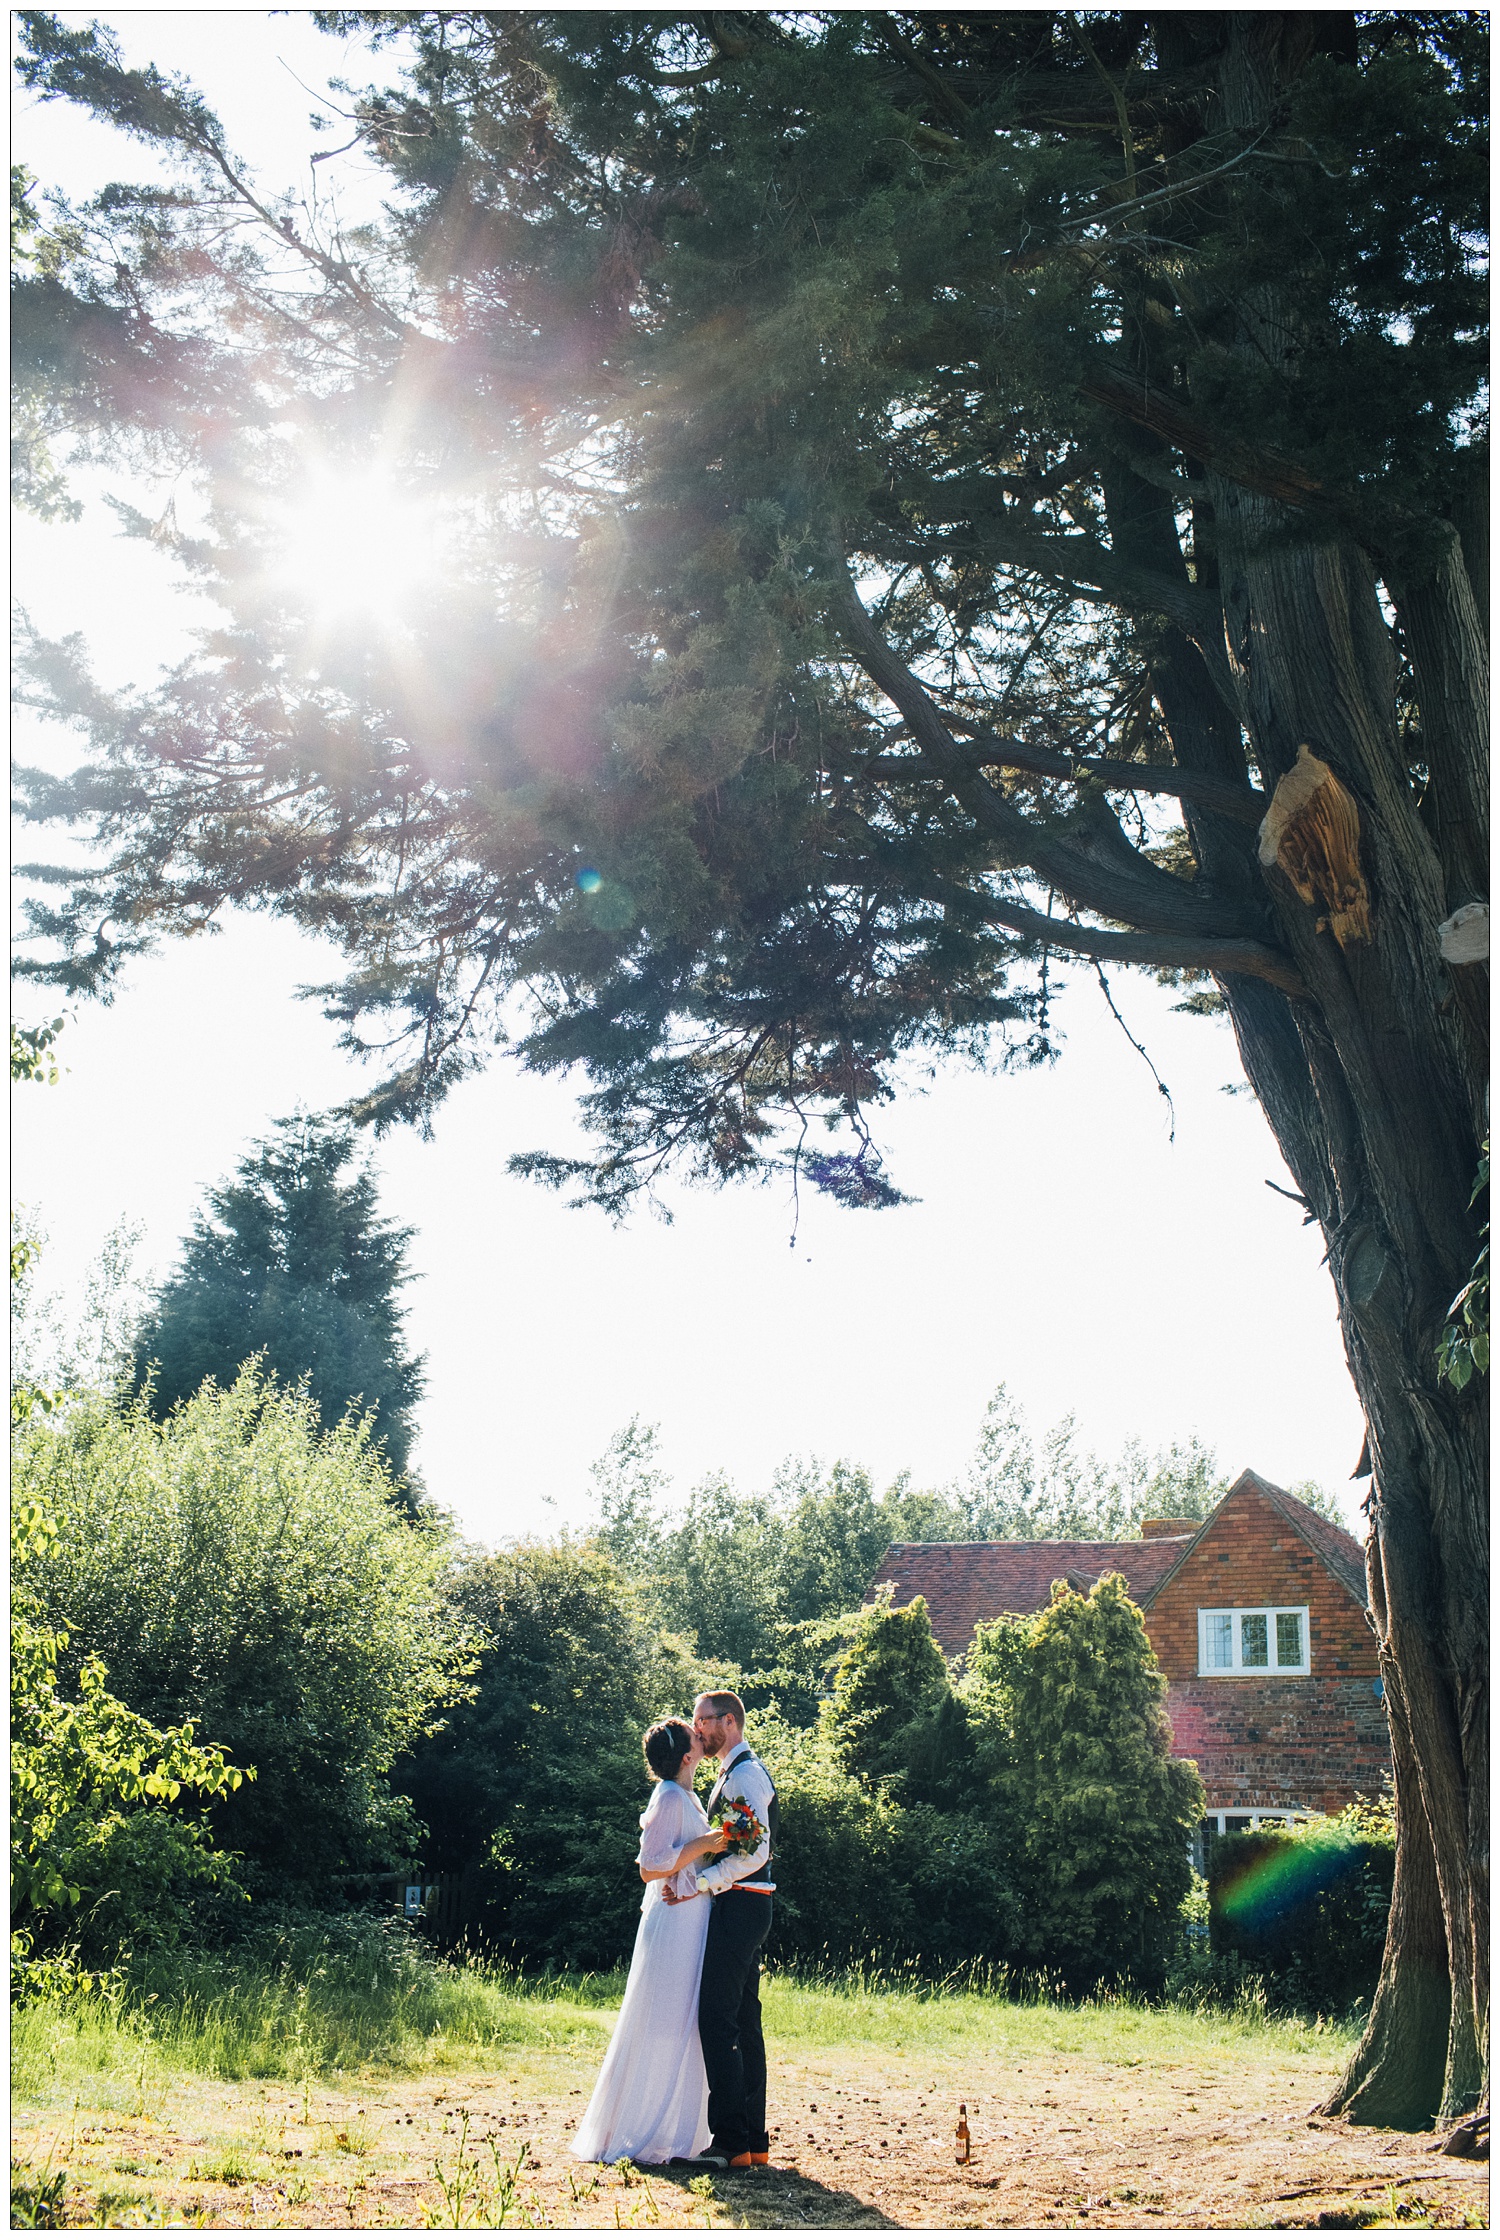 A newly married couple kiss under a tall tree at The Kench Hill Centre. The sun is flaring through the branches.